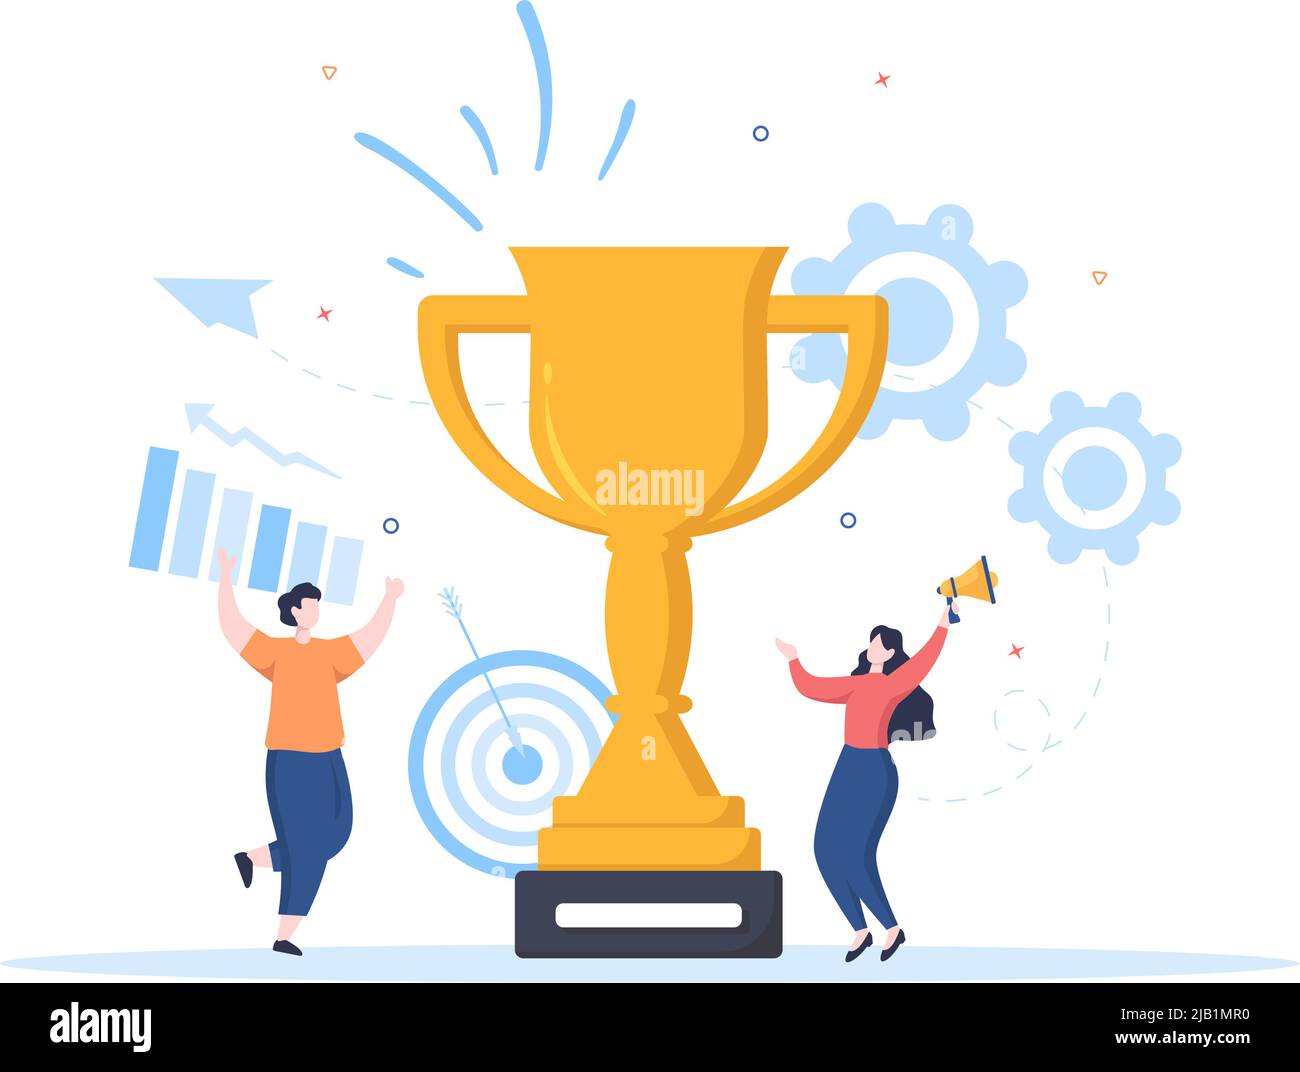 Happy Employee Appreciation Day Cartoon Illustration to Give Thanks or Recognition for their Employees with with Great Job or Trophy in Flat Style Stock Vector